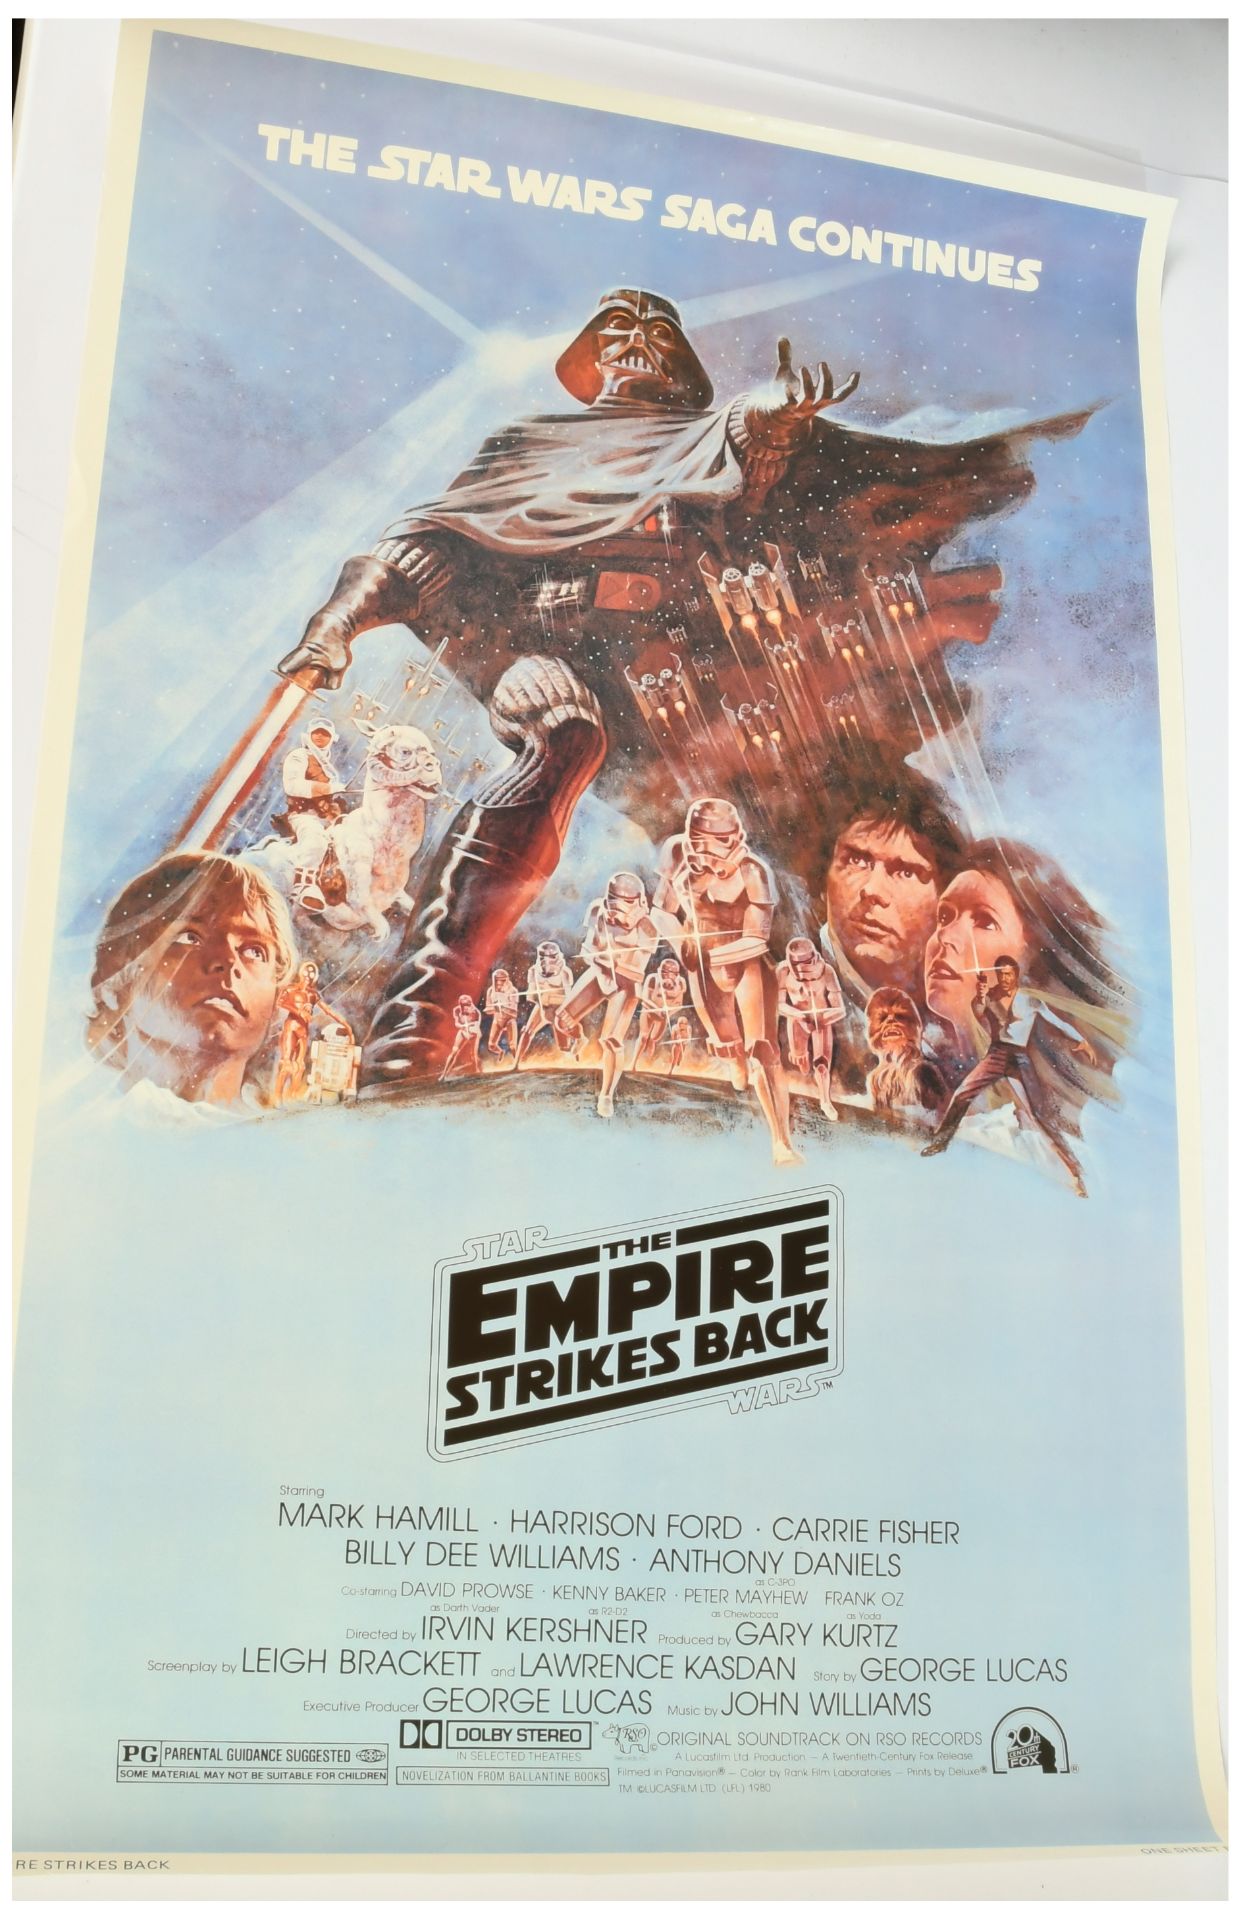 Star Wars: The Empire Strikes Back (1980) Film Poster. One Sheet. Style B